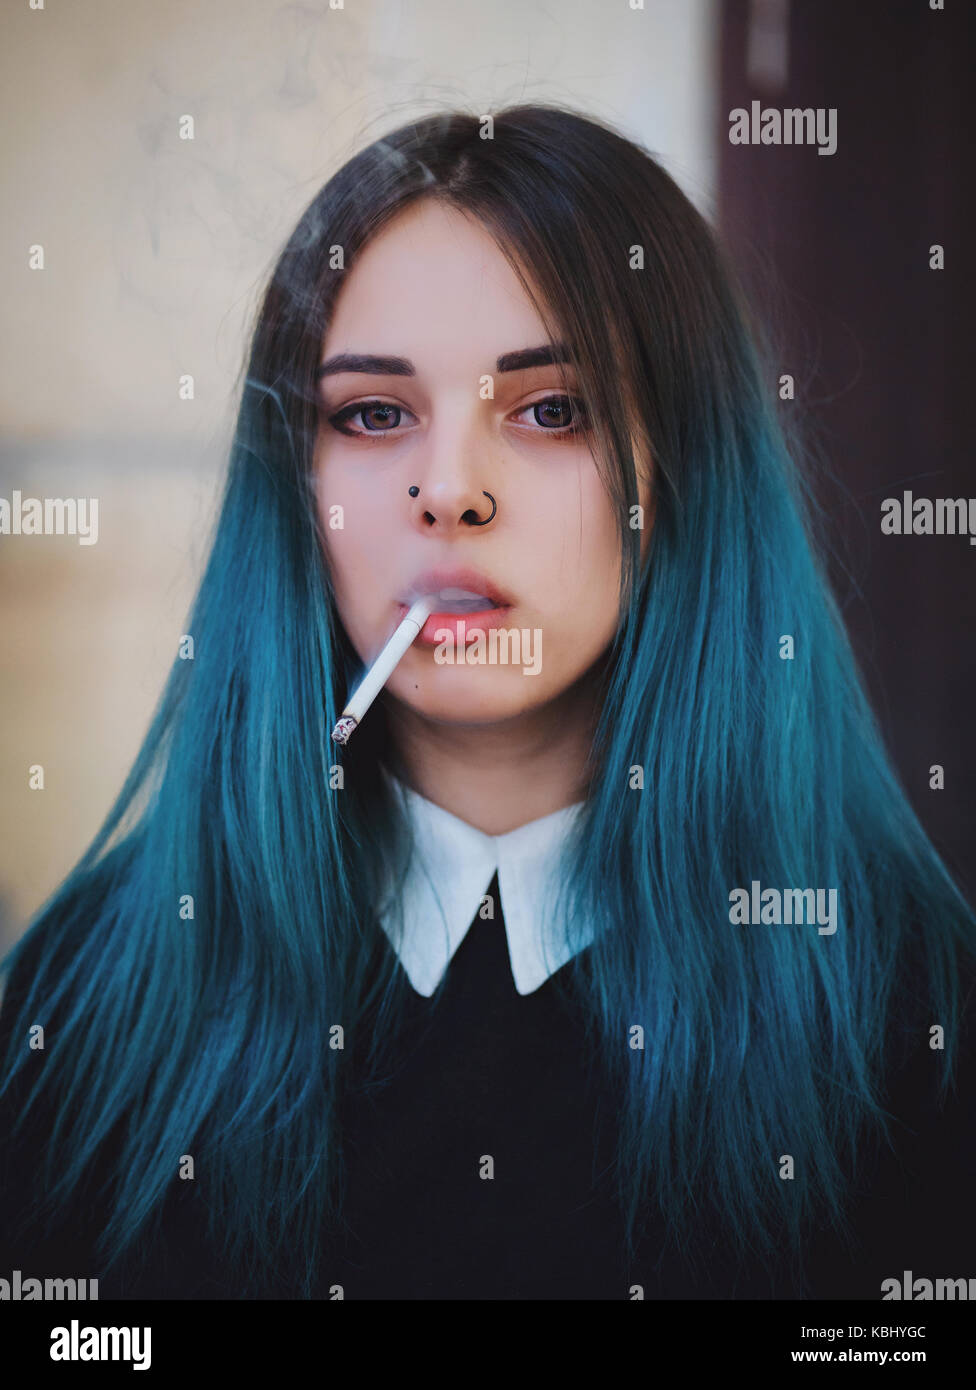 Emo girl smoking cigarette. Young student or pupil with blue colorful dyed hair, hat, piercing,lenses,ears tunnels and unusual hairstyle stands on bla Stock Photo